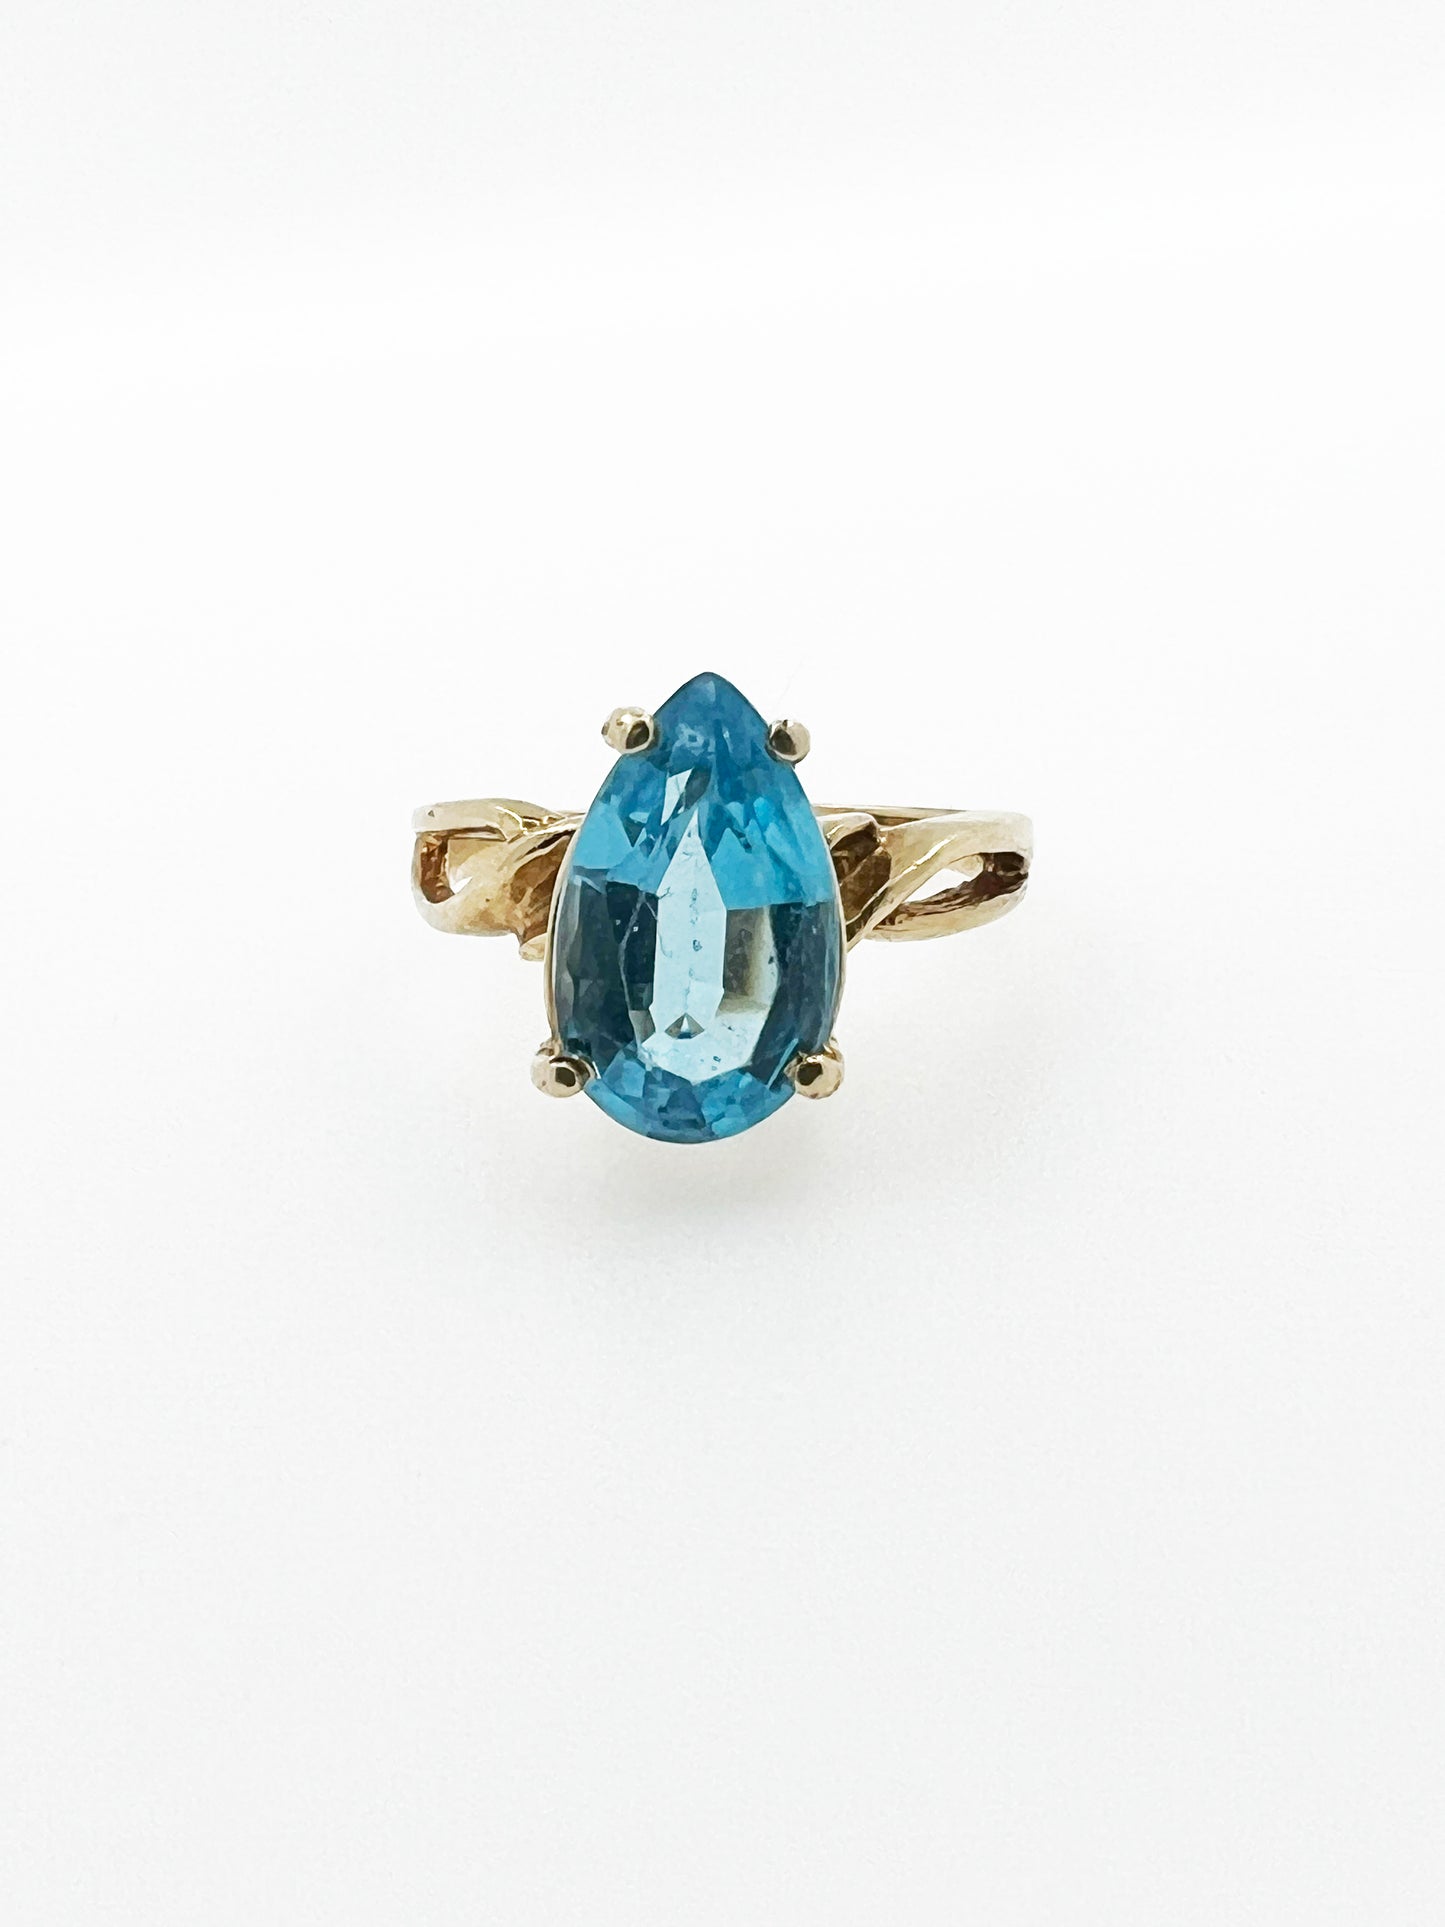 Pear Shaped Topaz Ring in 14k Yellow Gold